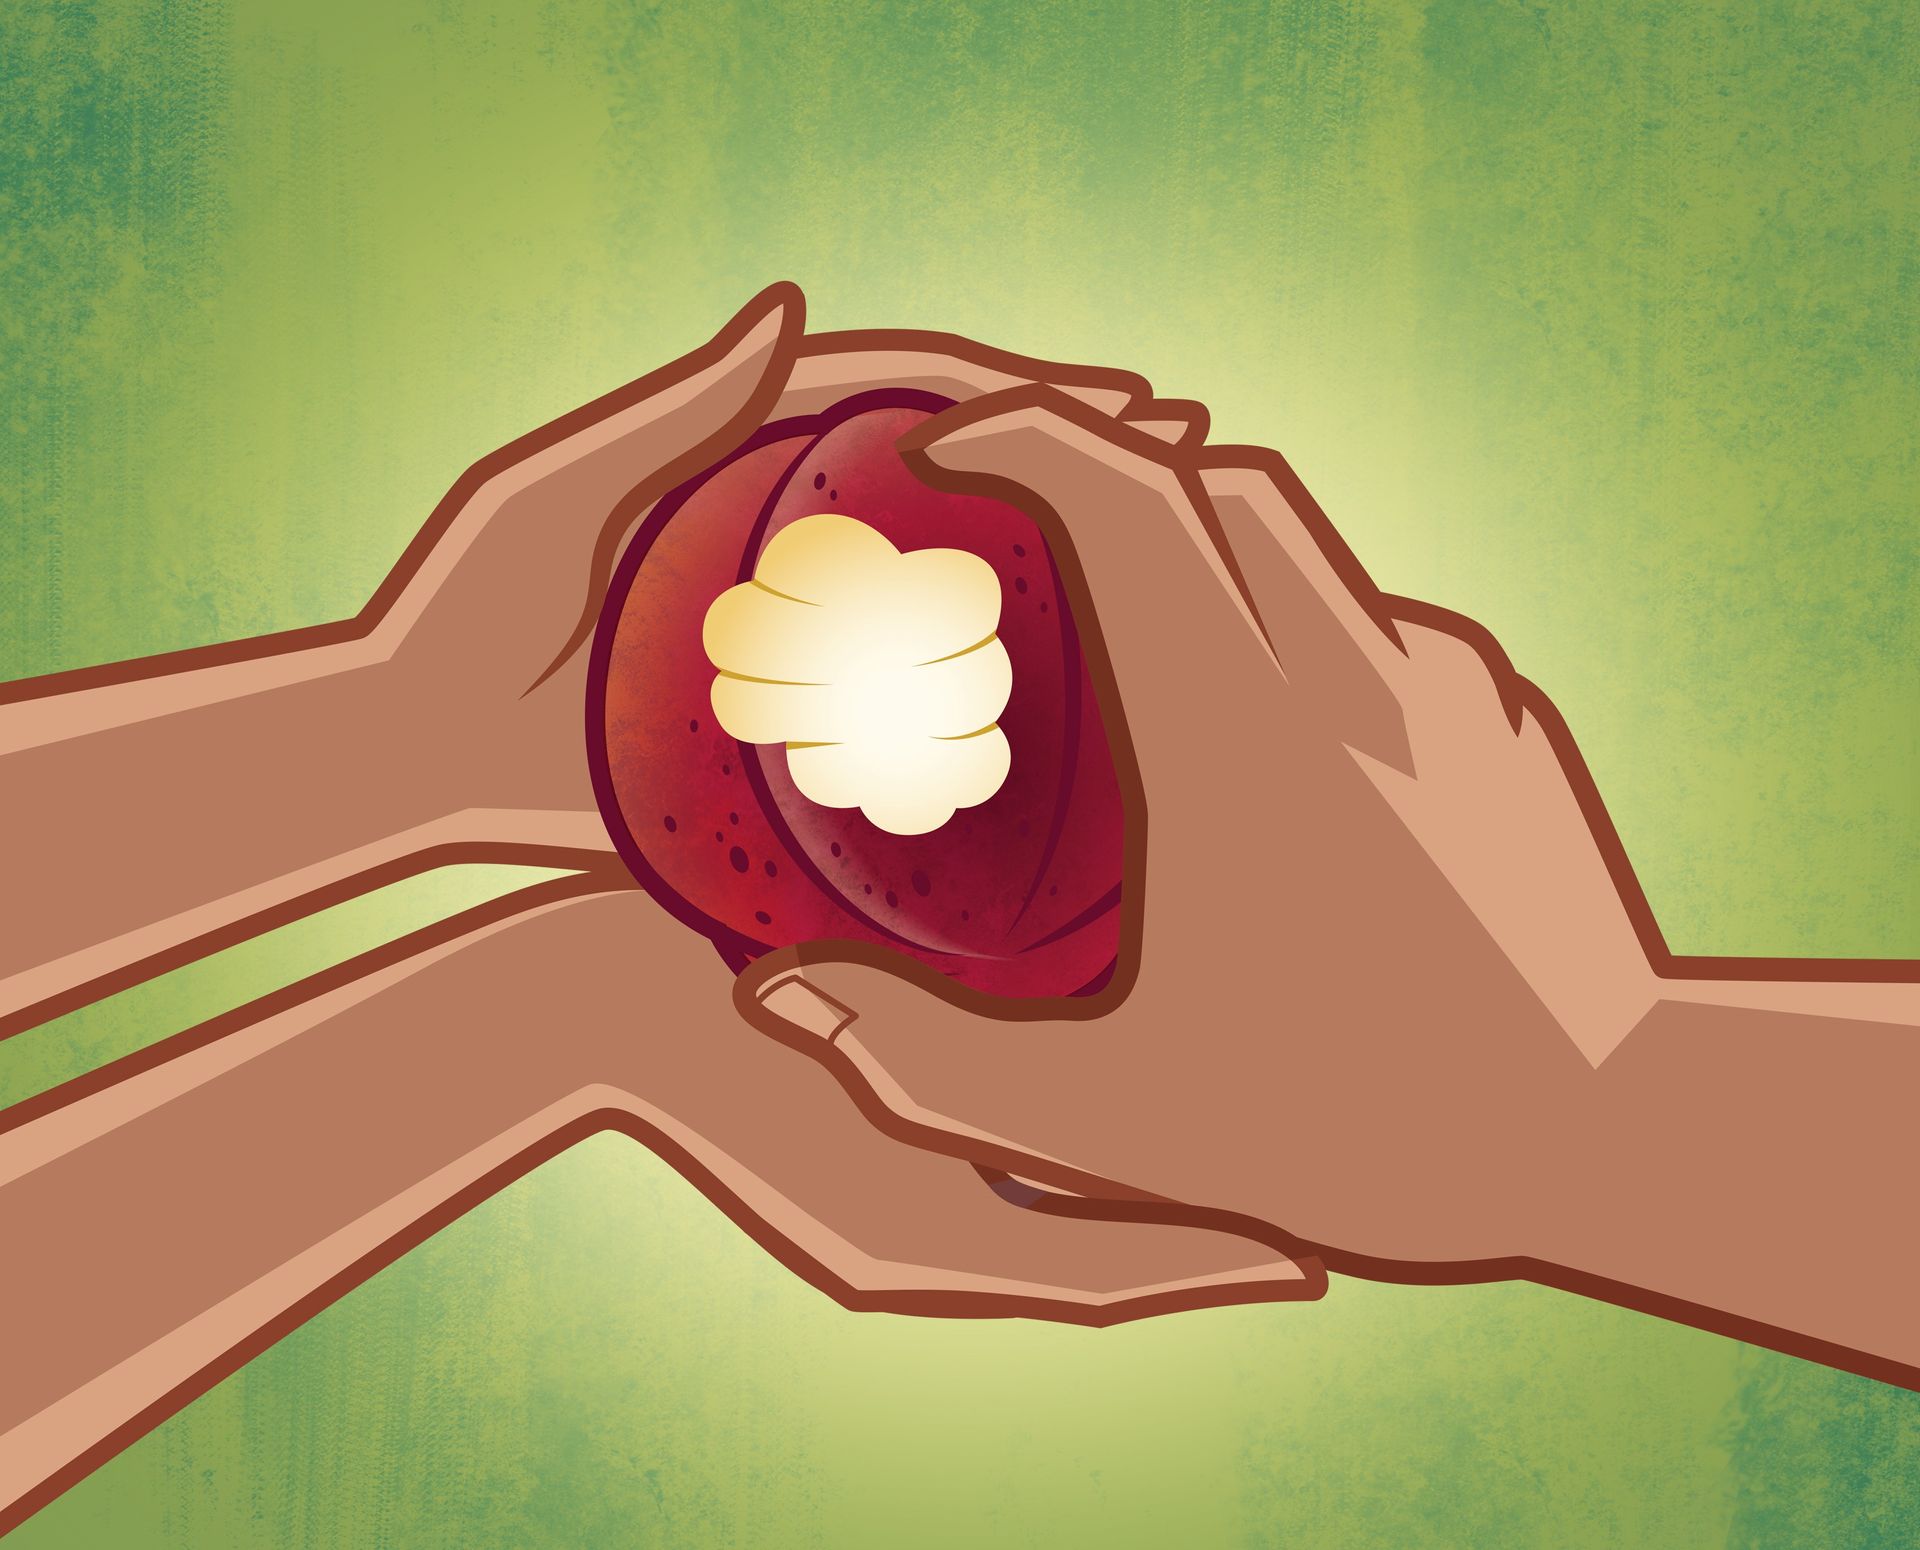 Illustration of Adam and Eve's hands holding fruit. Genesis 3:6–7; Moses 4:12